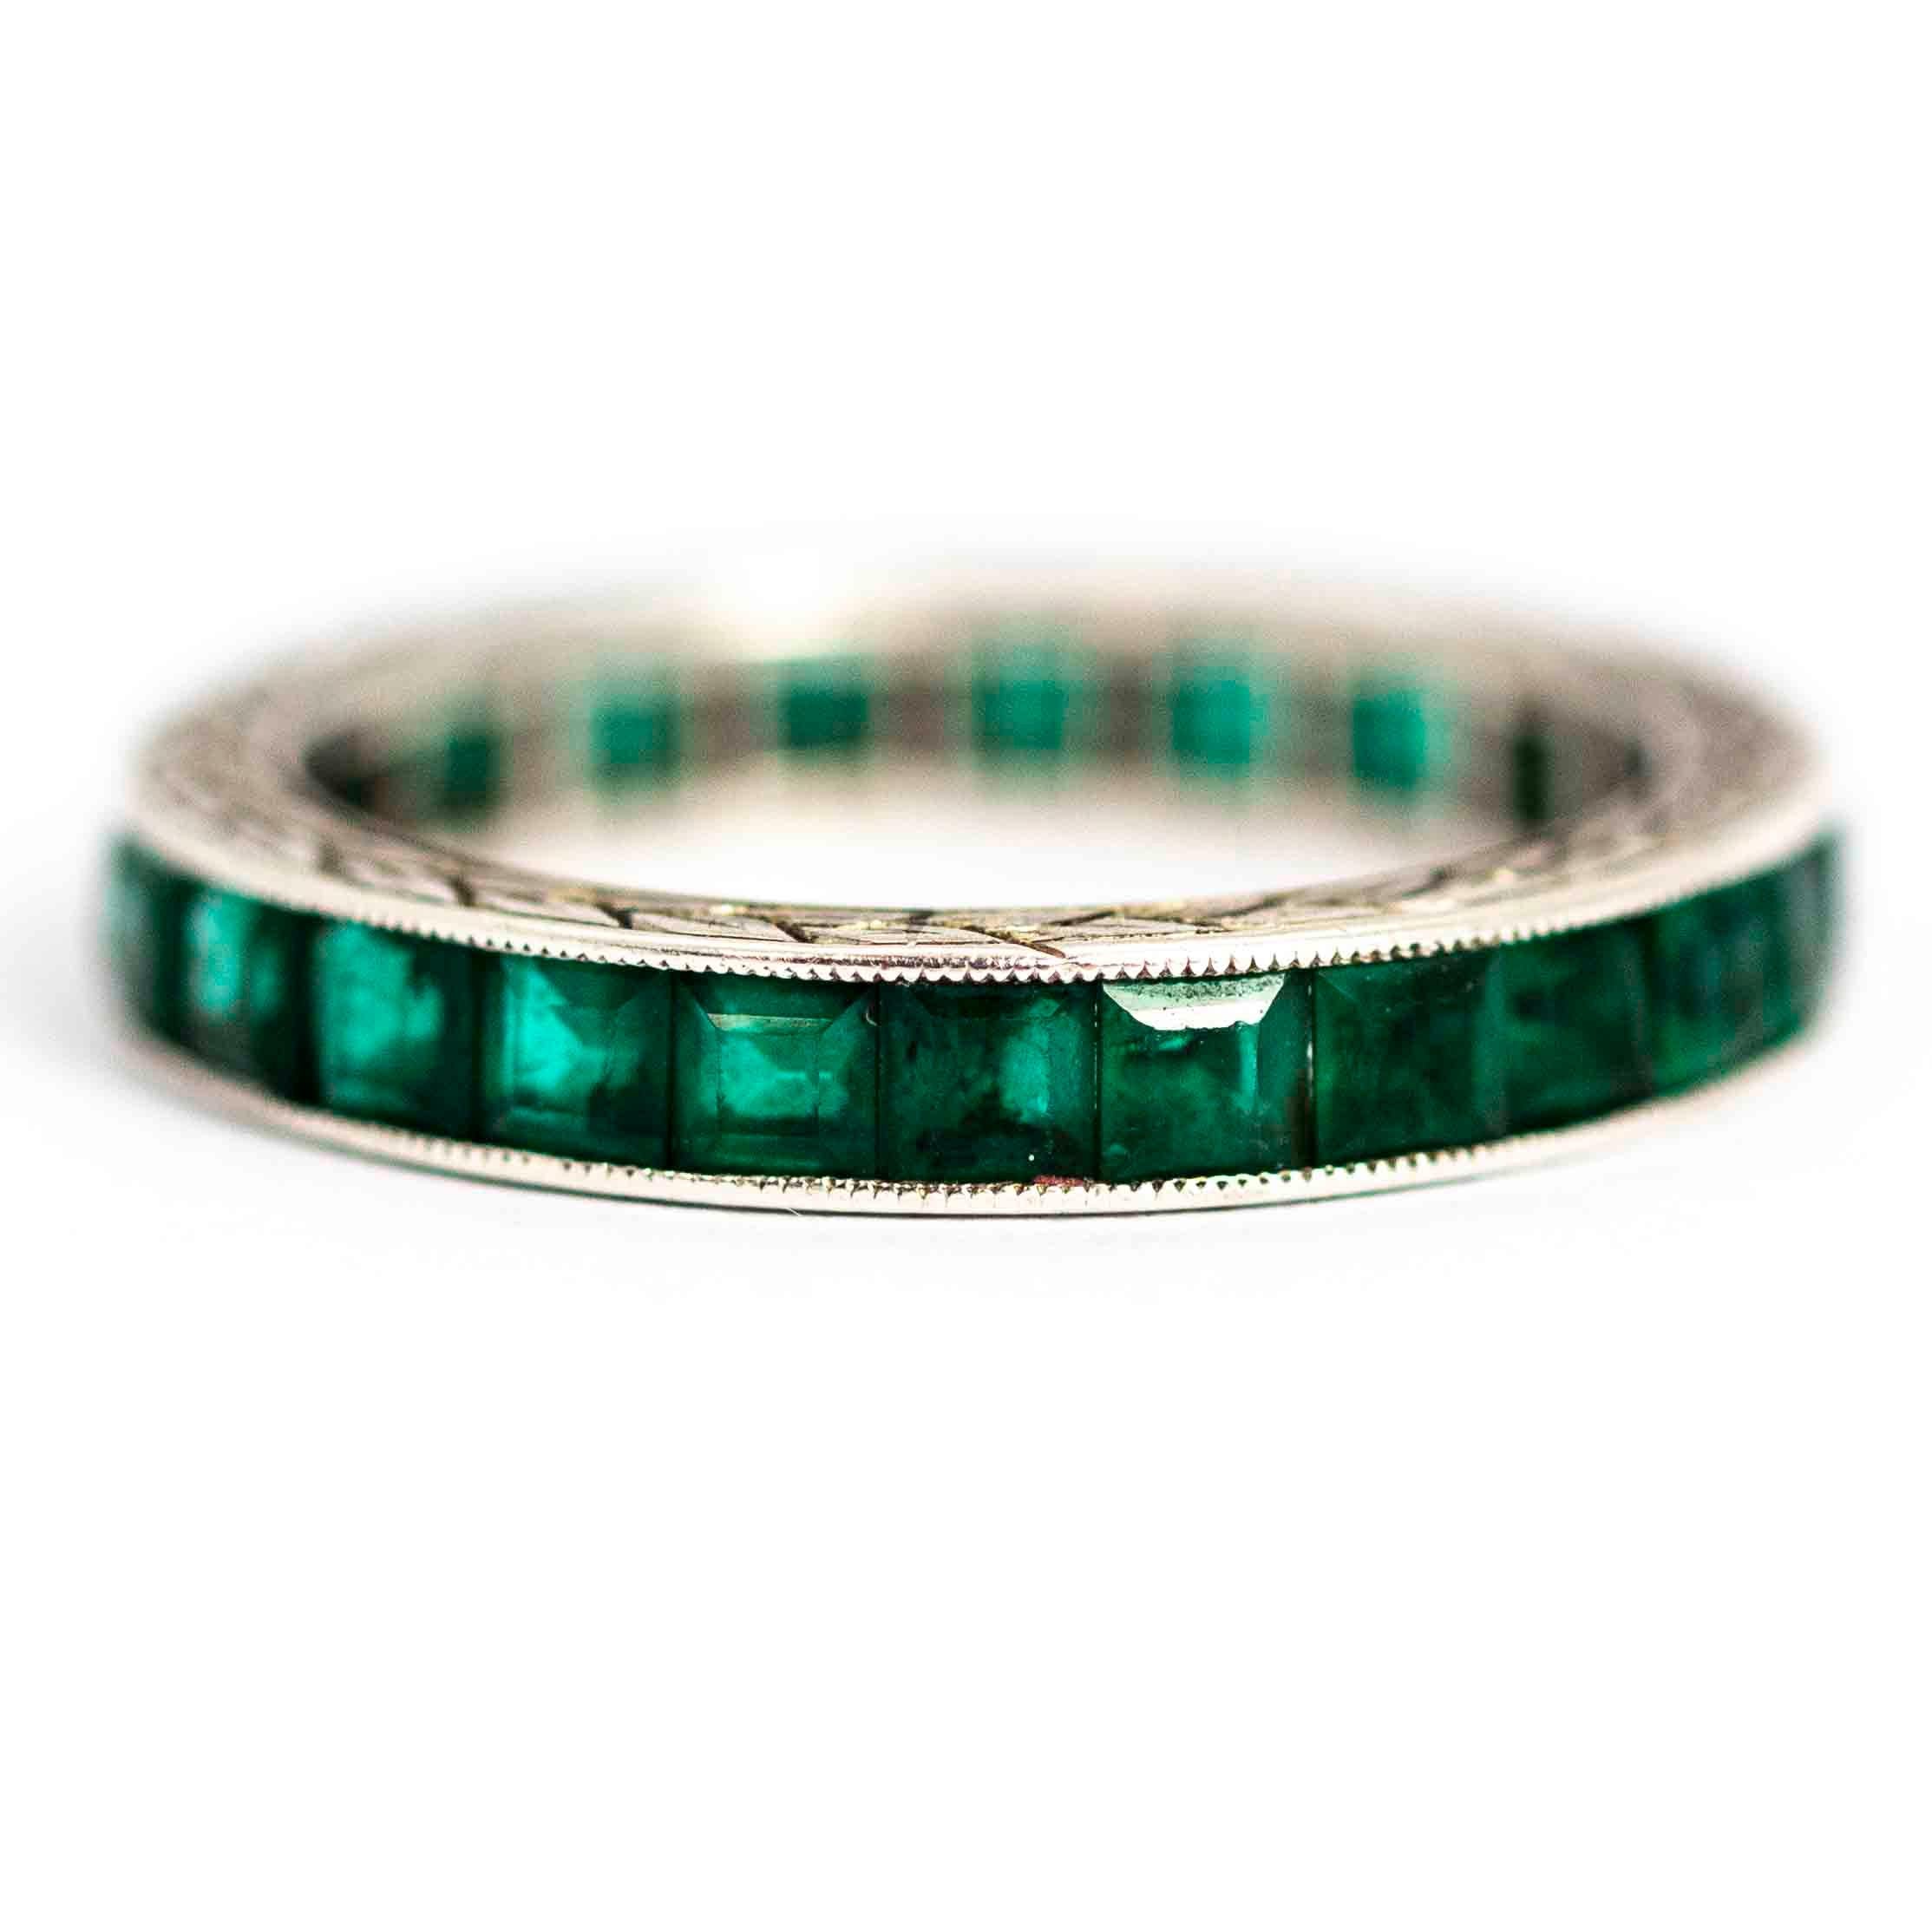 A superb vintage Art Deco eternity band ring fully set with wonderful square cut emeralds. The edges of the band are hang-chased with beautiful foliate detailing. Modelled in platinum

Ring Size: UK K 1/2, US 5

Band Width: 3.22mm

Depth to Finger: